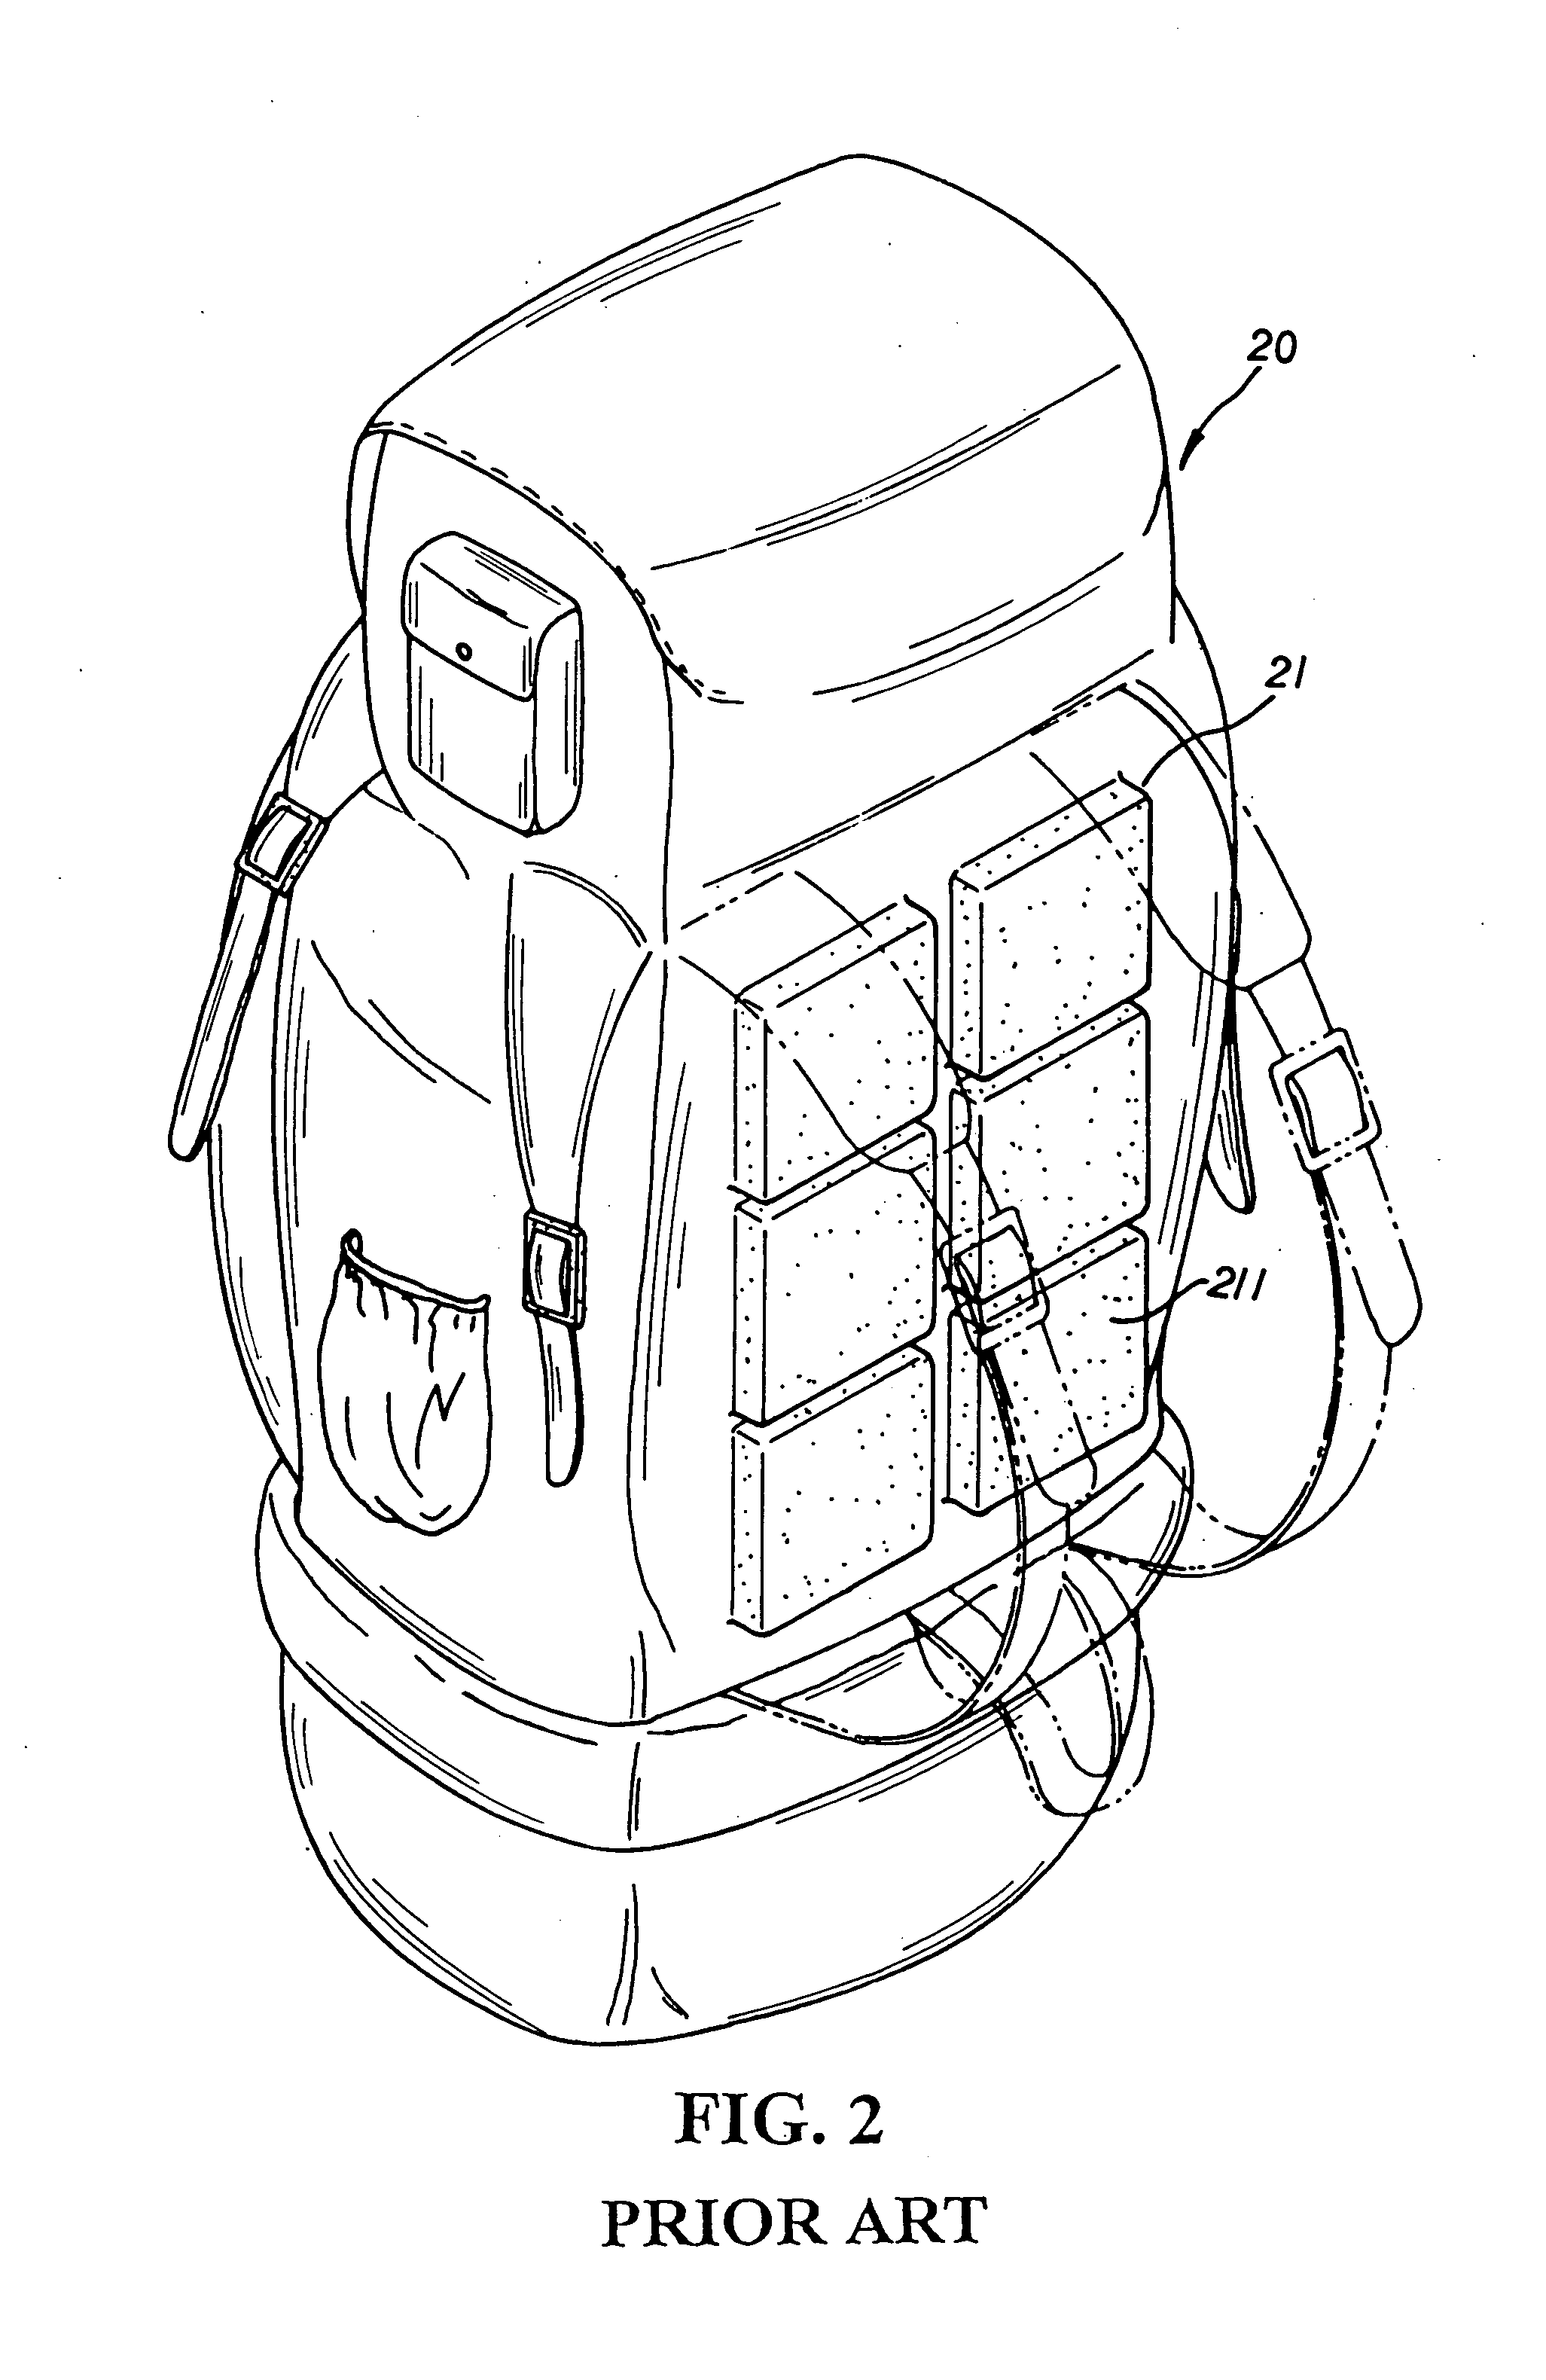 Back sack with heat dissipation effect